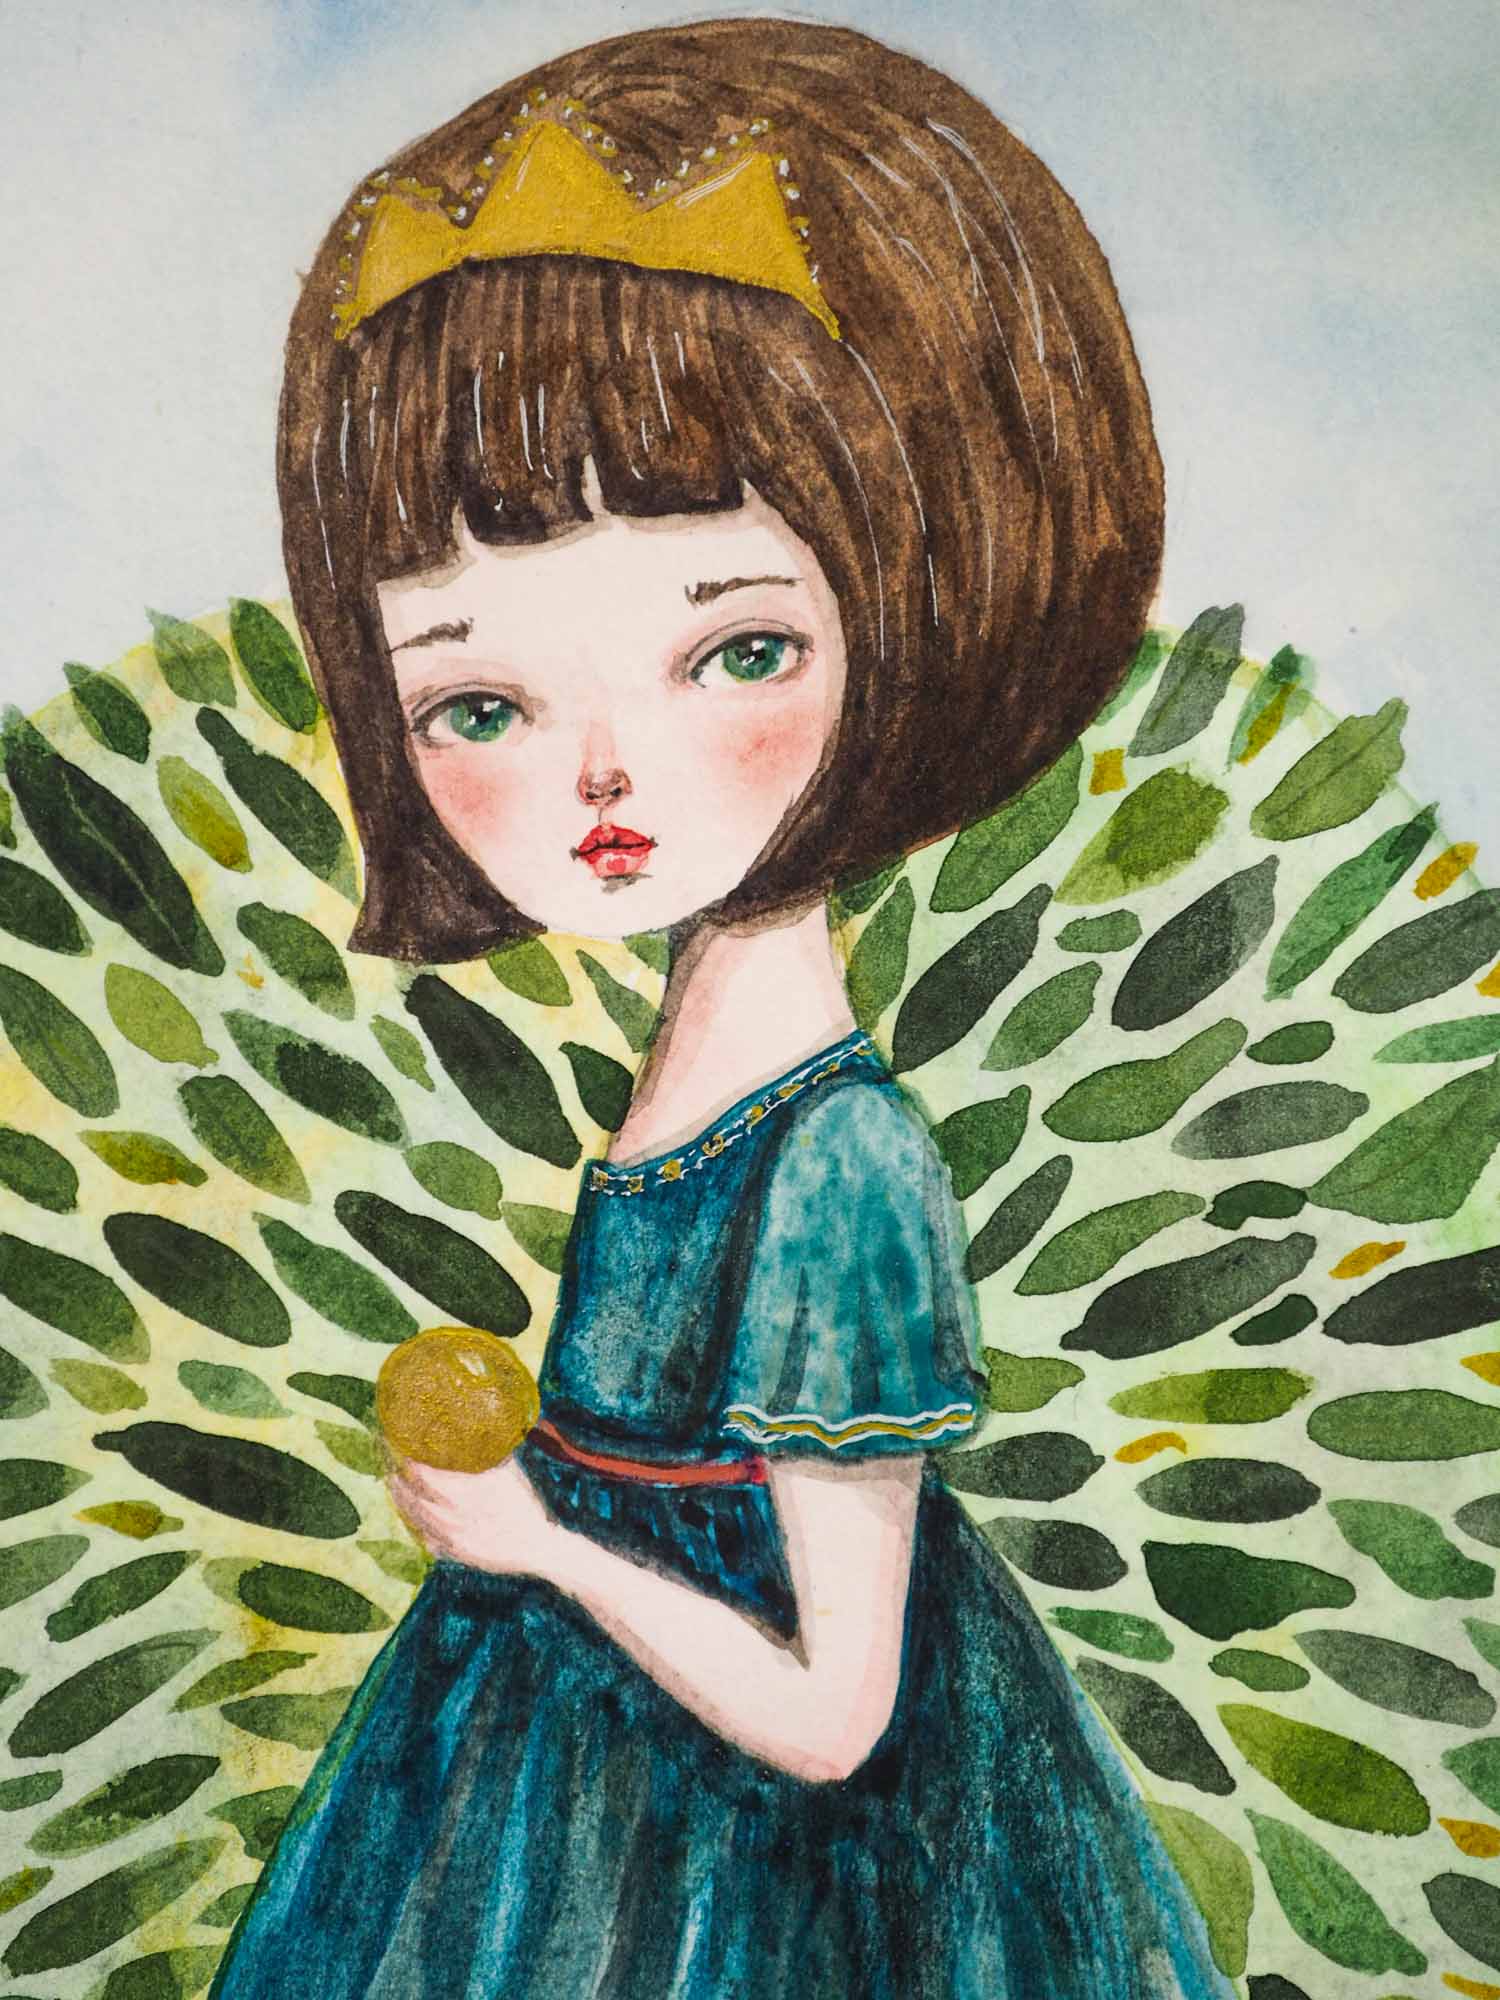 Danita made this beautiful watercolor illustration for her book EVER AFTER in collaboration with Tam Laporte, and now it is available to go to her forever when you adopt this watercolour painting. Made on a 9x12 inches watercolor paper, Princess Tiana is holding her gold ball in her hands, ready to play in a round tree while the faithful frog awaits to retrieve the gold ball when it falls into the pond.